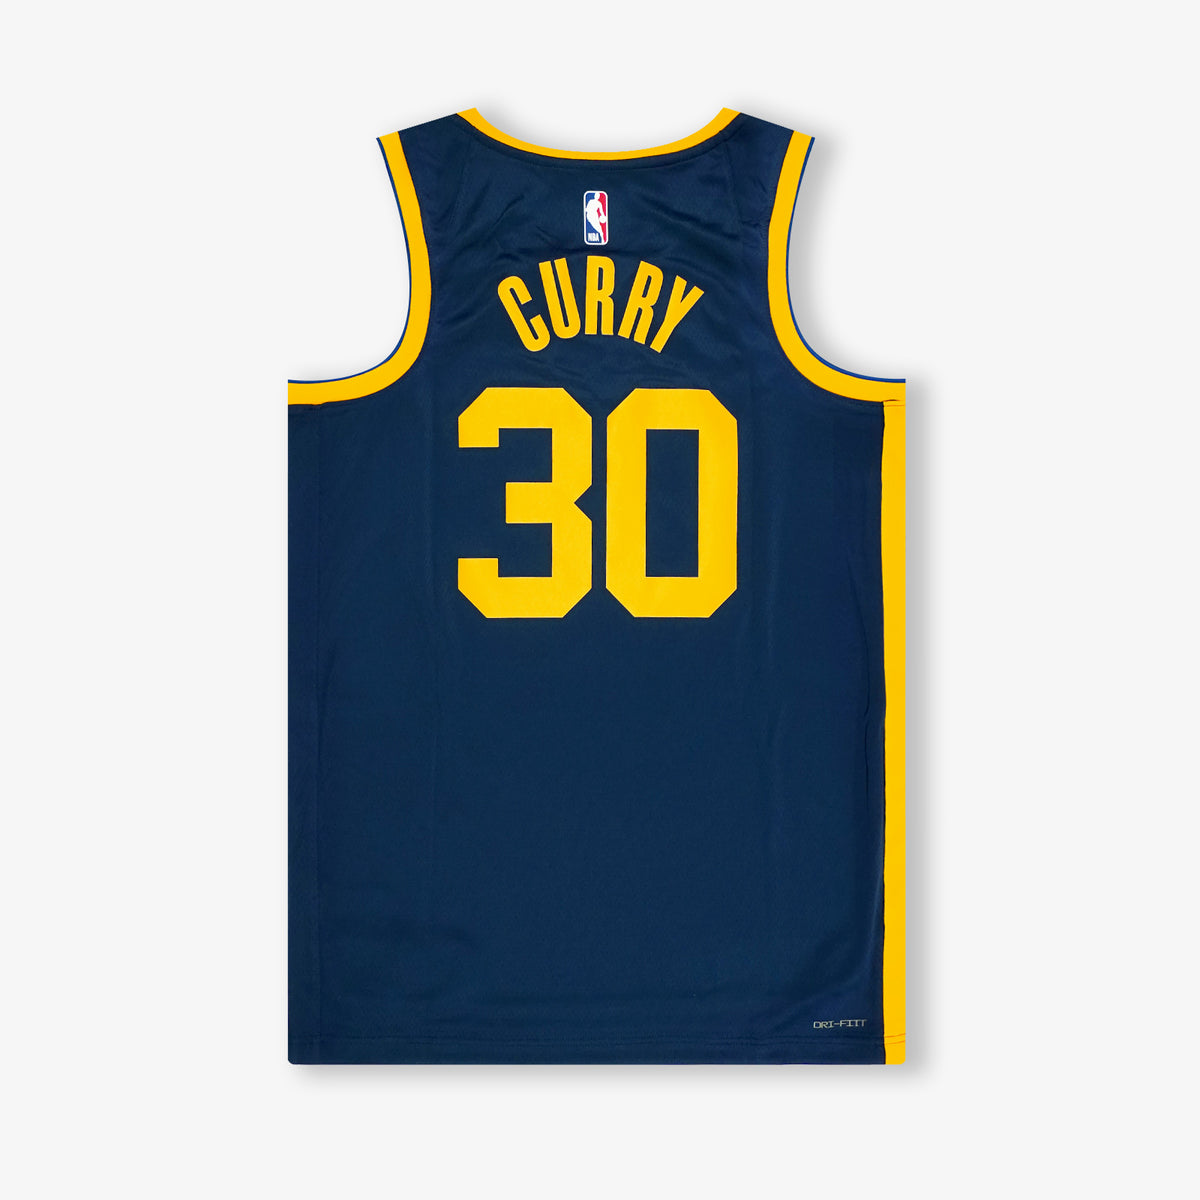 Shop Jersey For Men Basketball Curry Black Gsw For 13 Yearold with